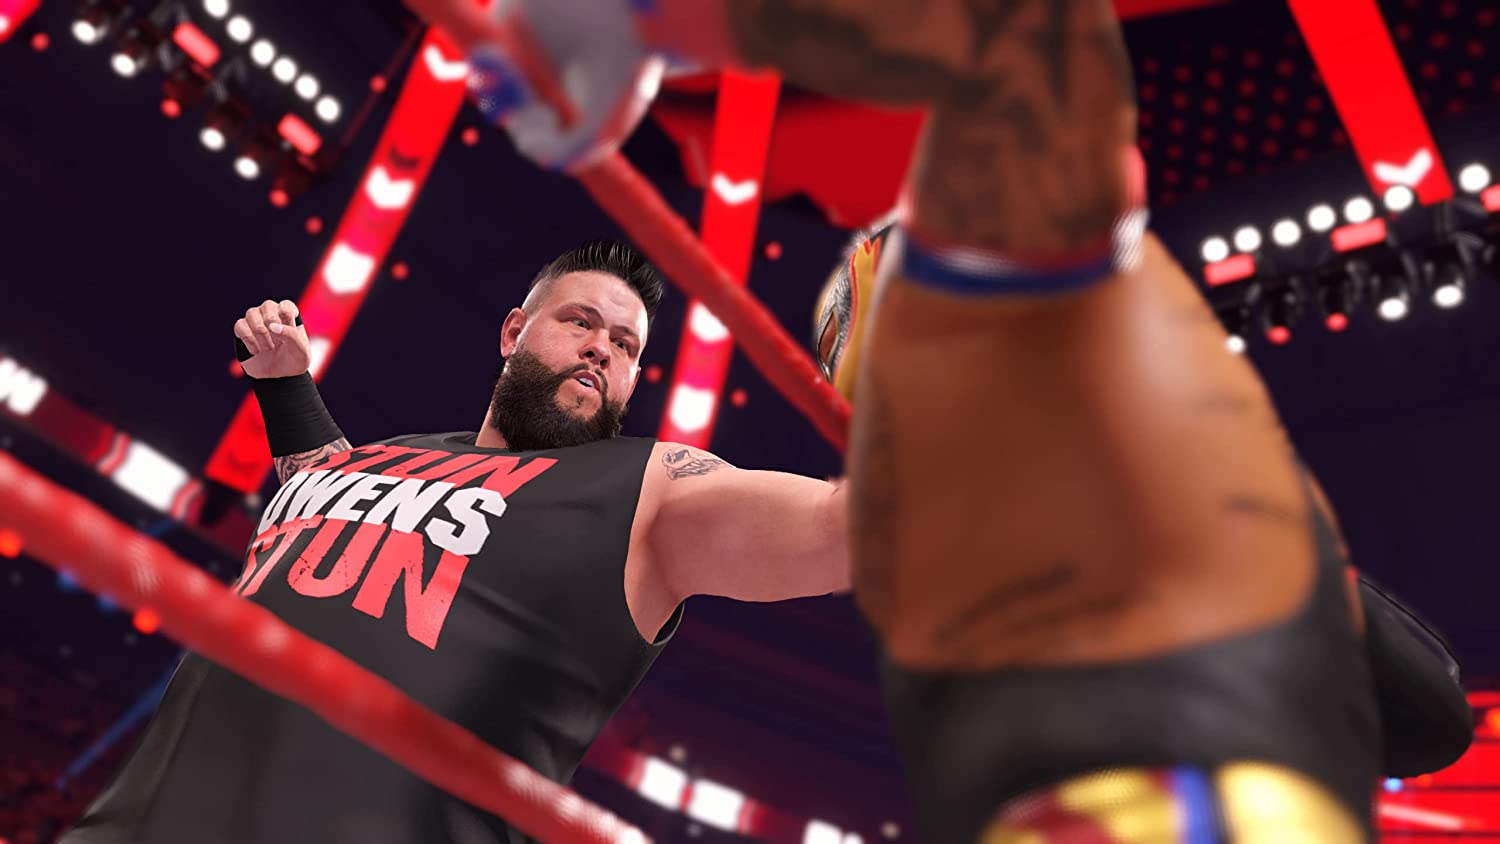 WR3D WWE 2K22 BEST Gameplay RELEASED FOR ANDROID 